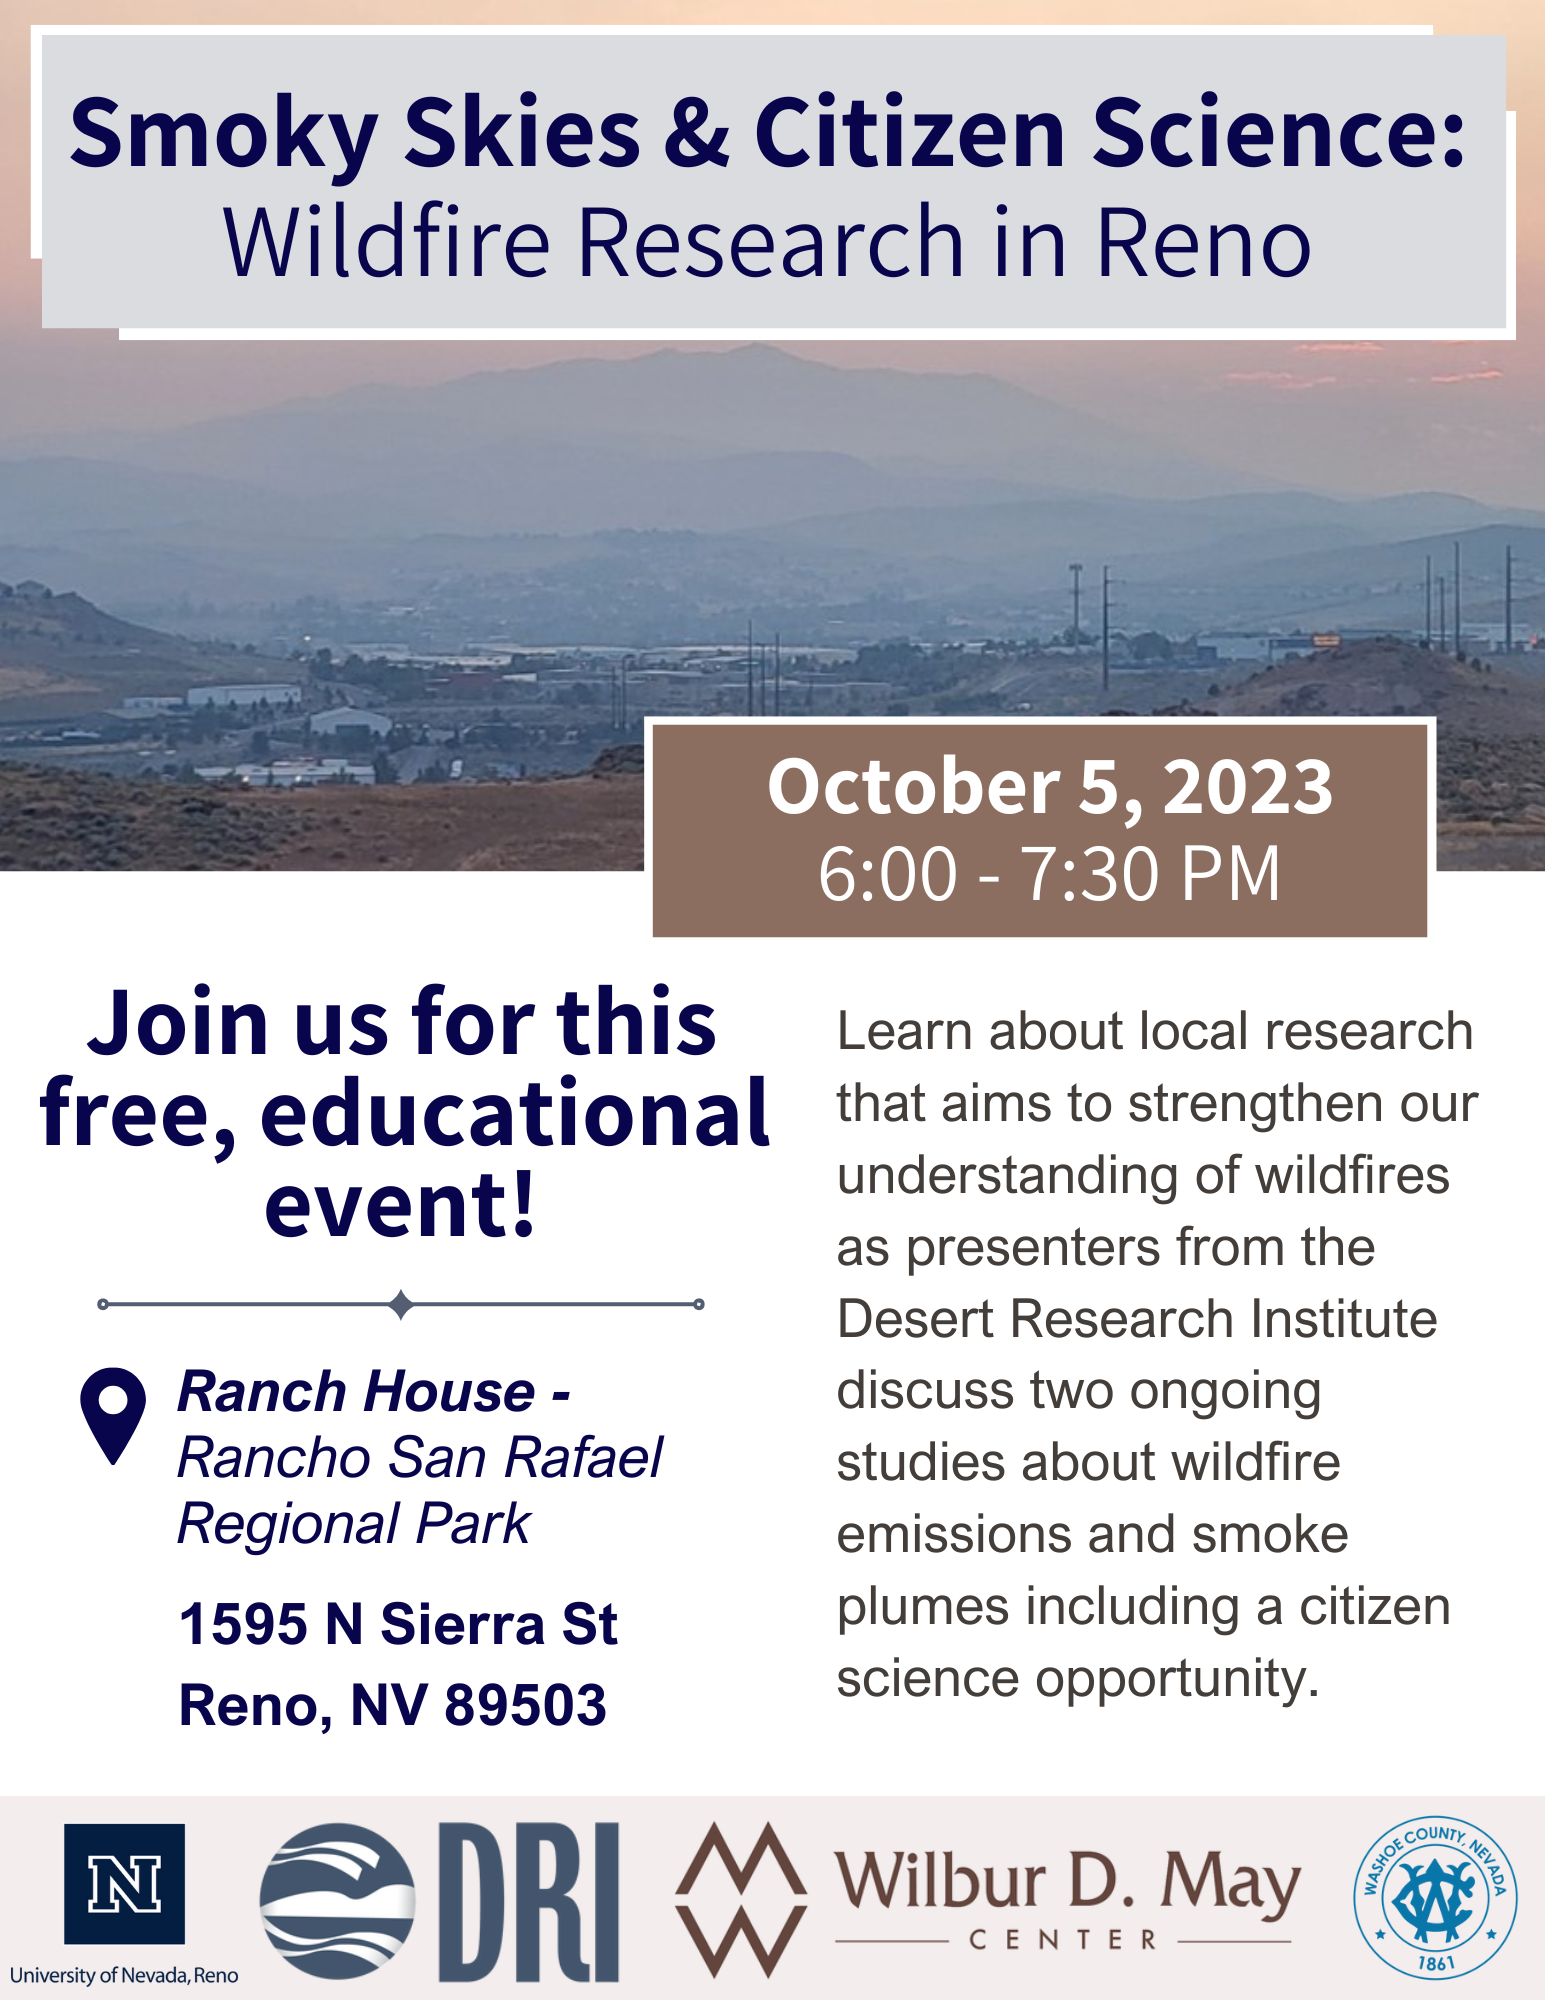 Details of wildfire event, stylized into flyer